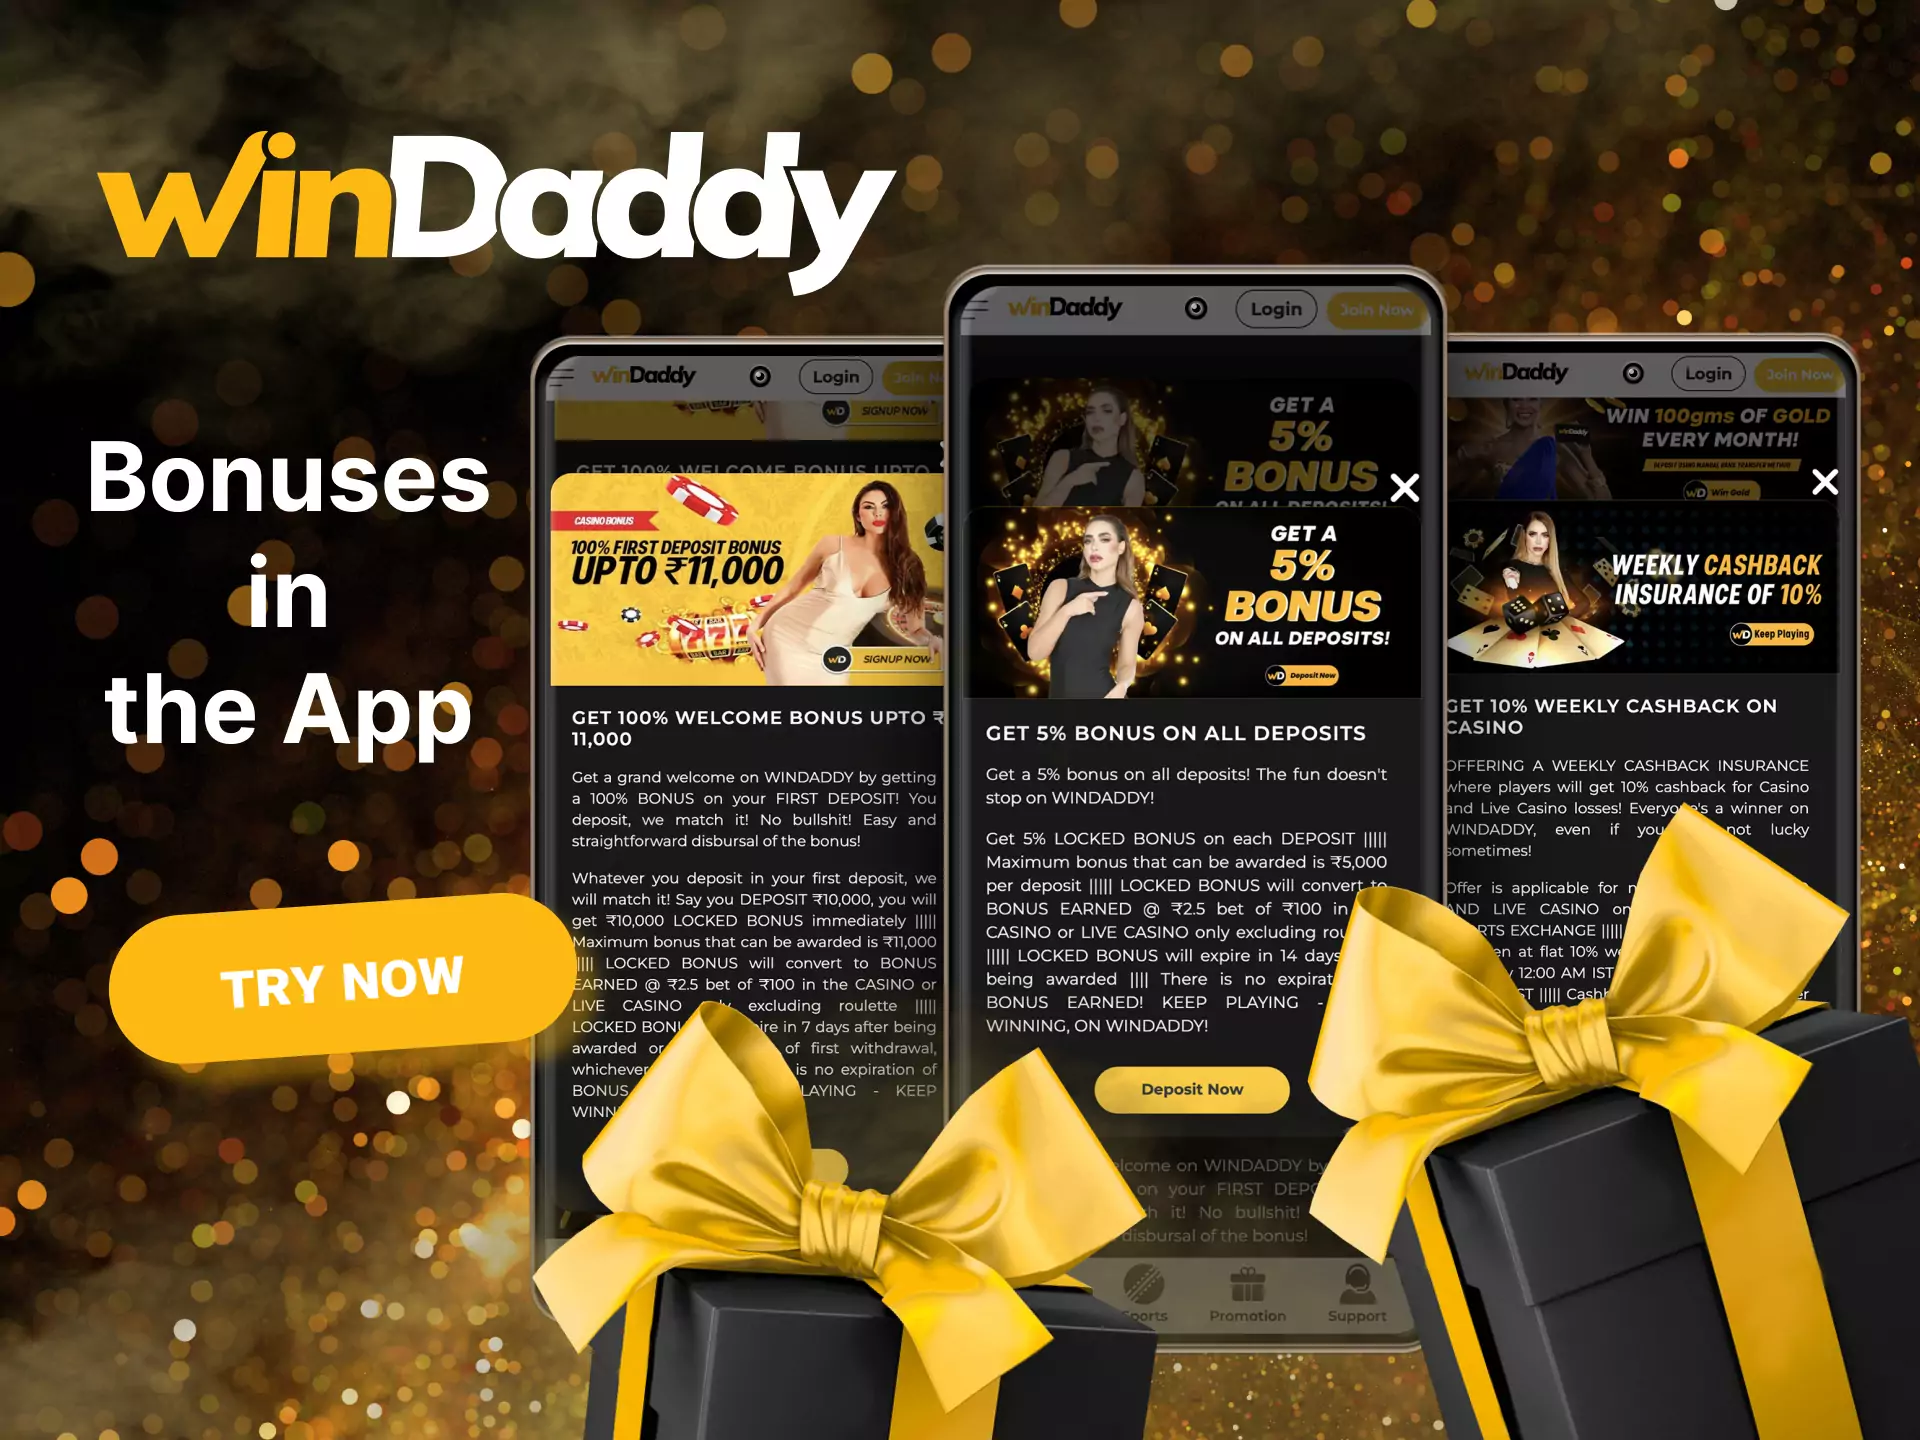 Get special Windaddy bonuses for active participation.